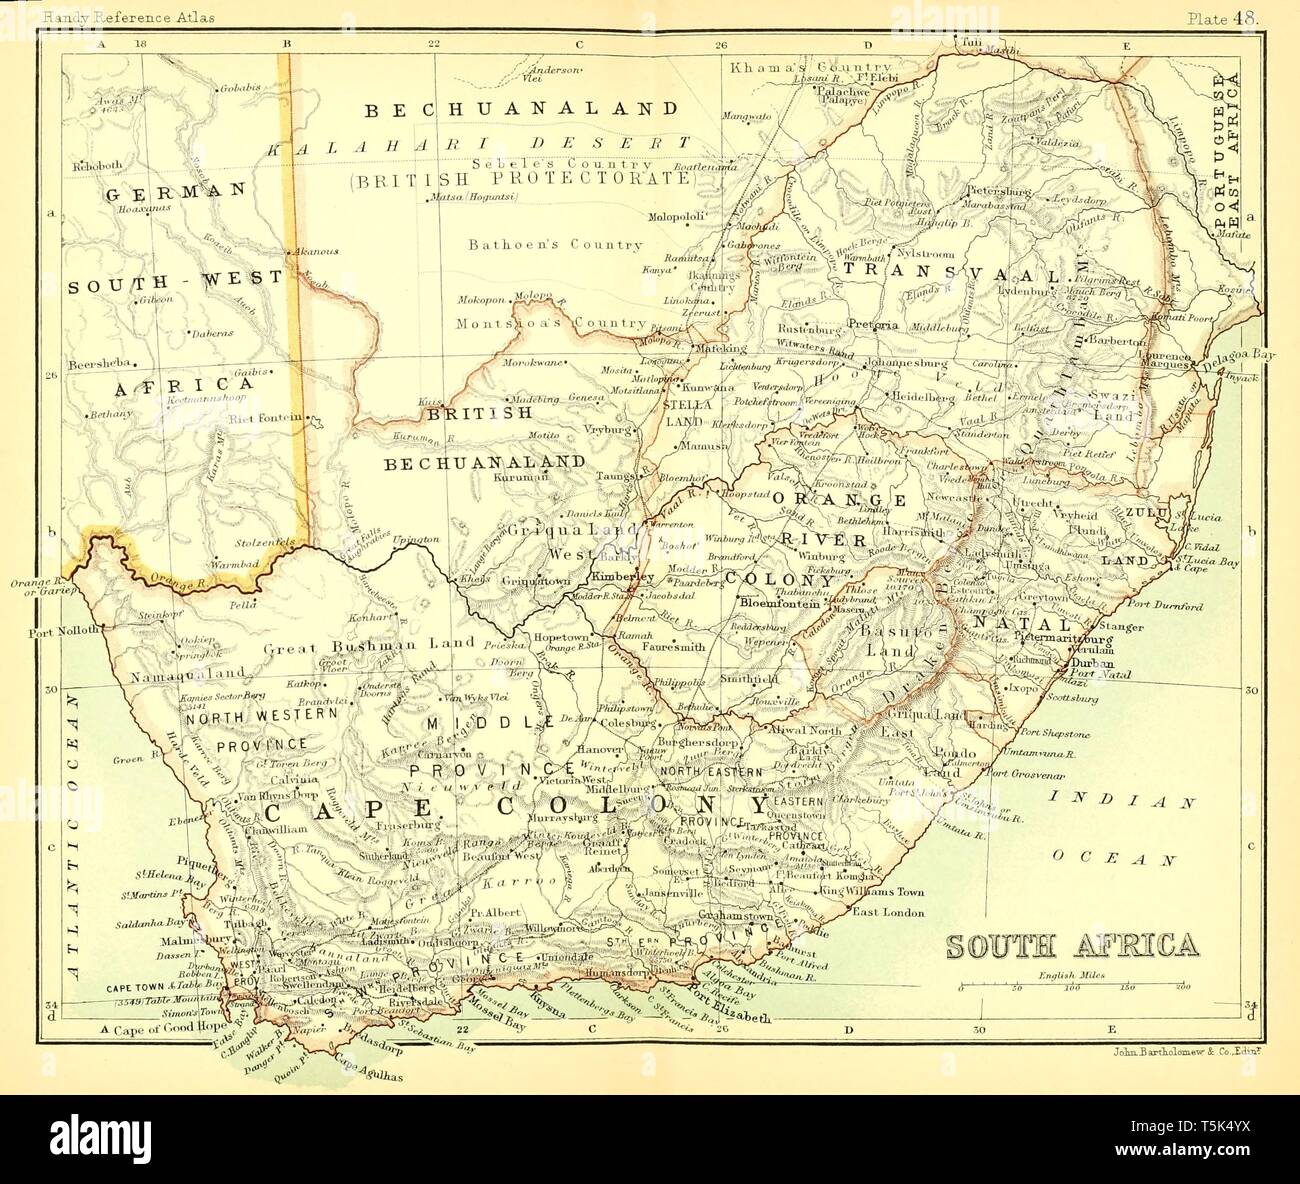 Beautiful vintage hand drawn map illustrations of South Africa from old book. Can be used as poster or decorative element for interior design. Stock Photo